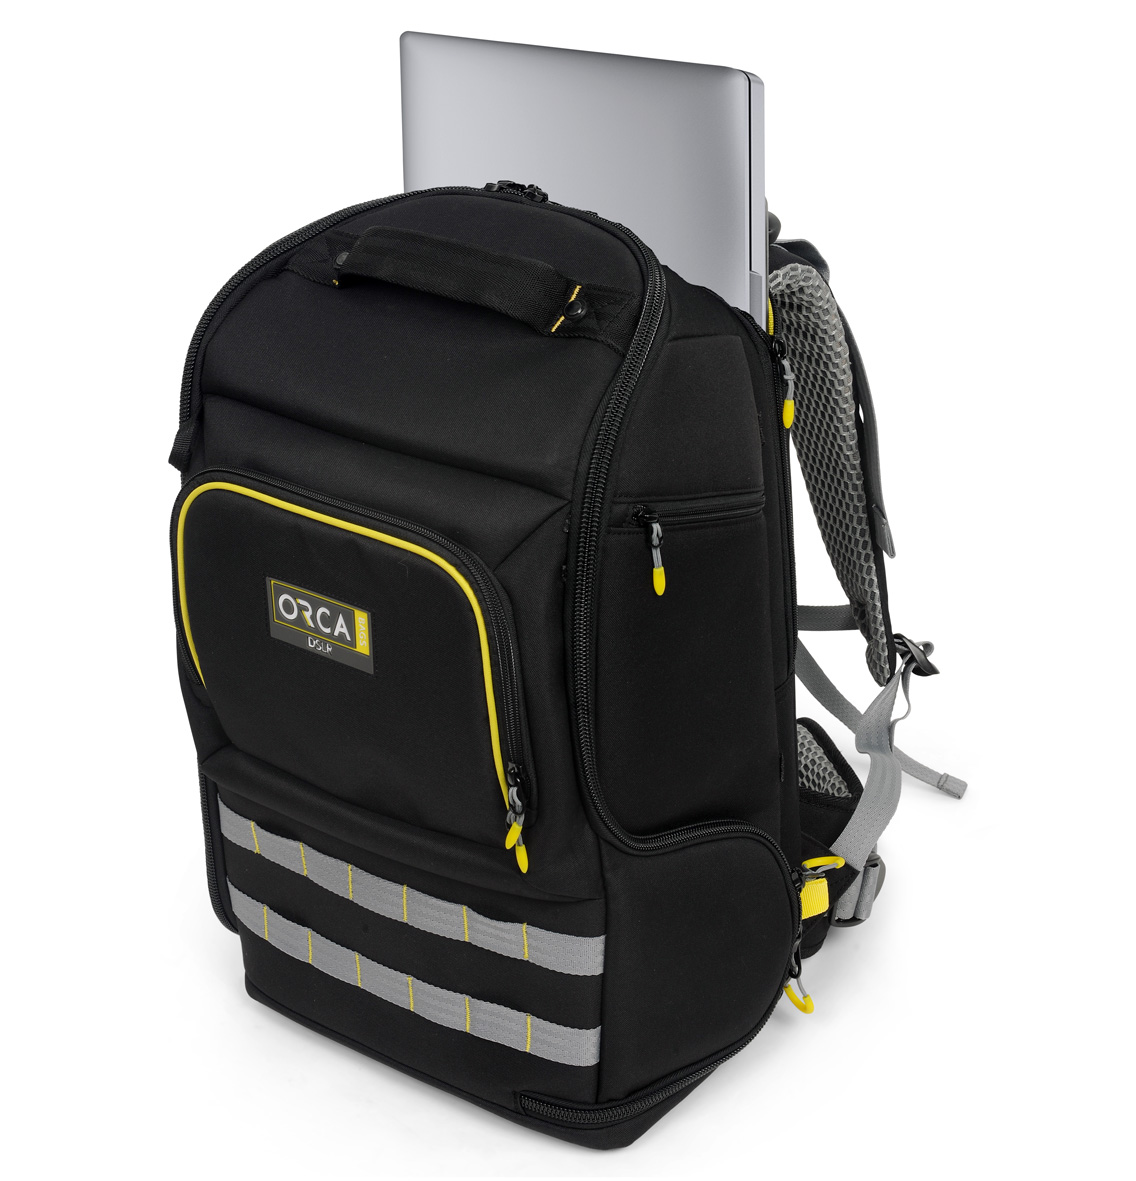 ORCA OR-536 DSLR-Quick Draw Backpack for Mirrorless and DSLR Cameras